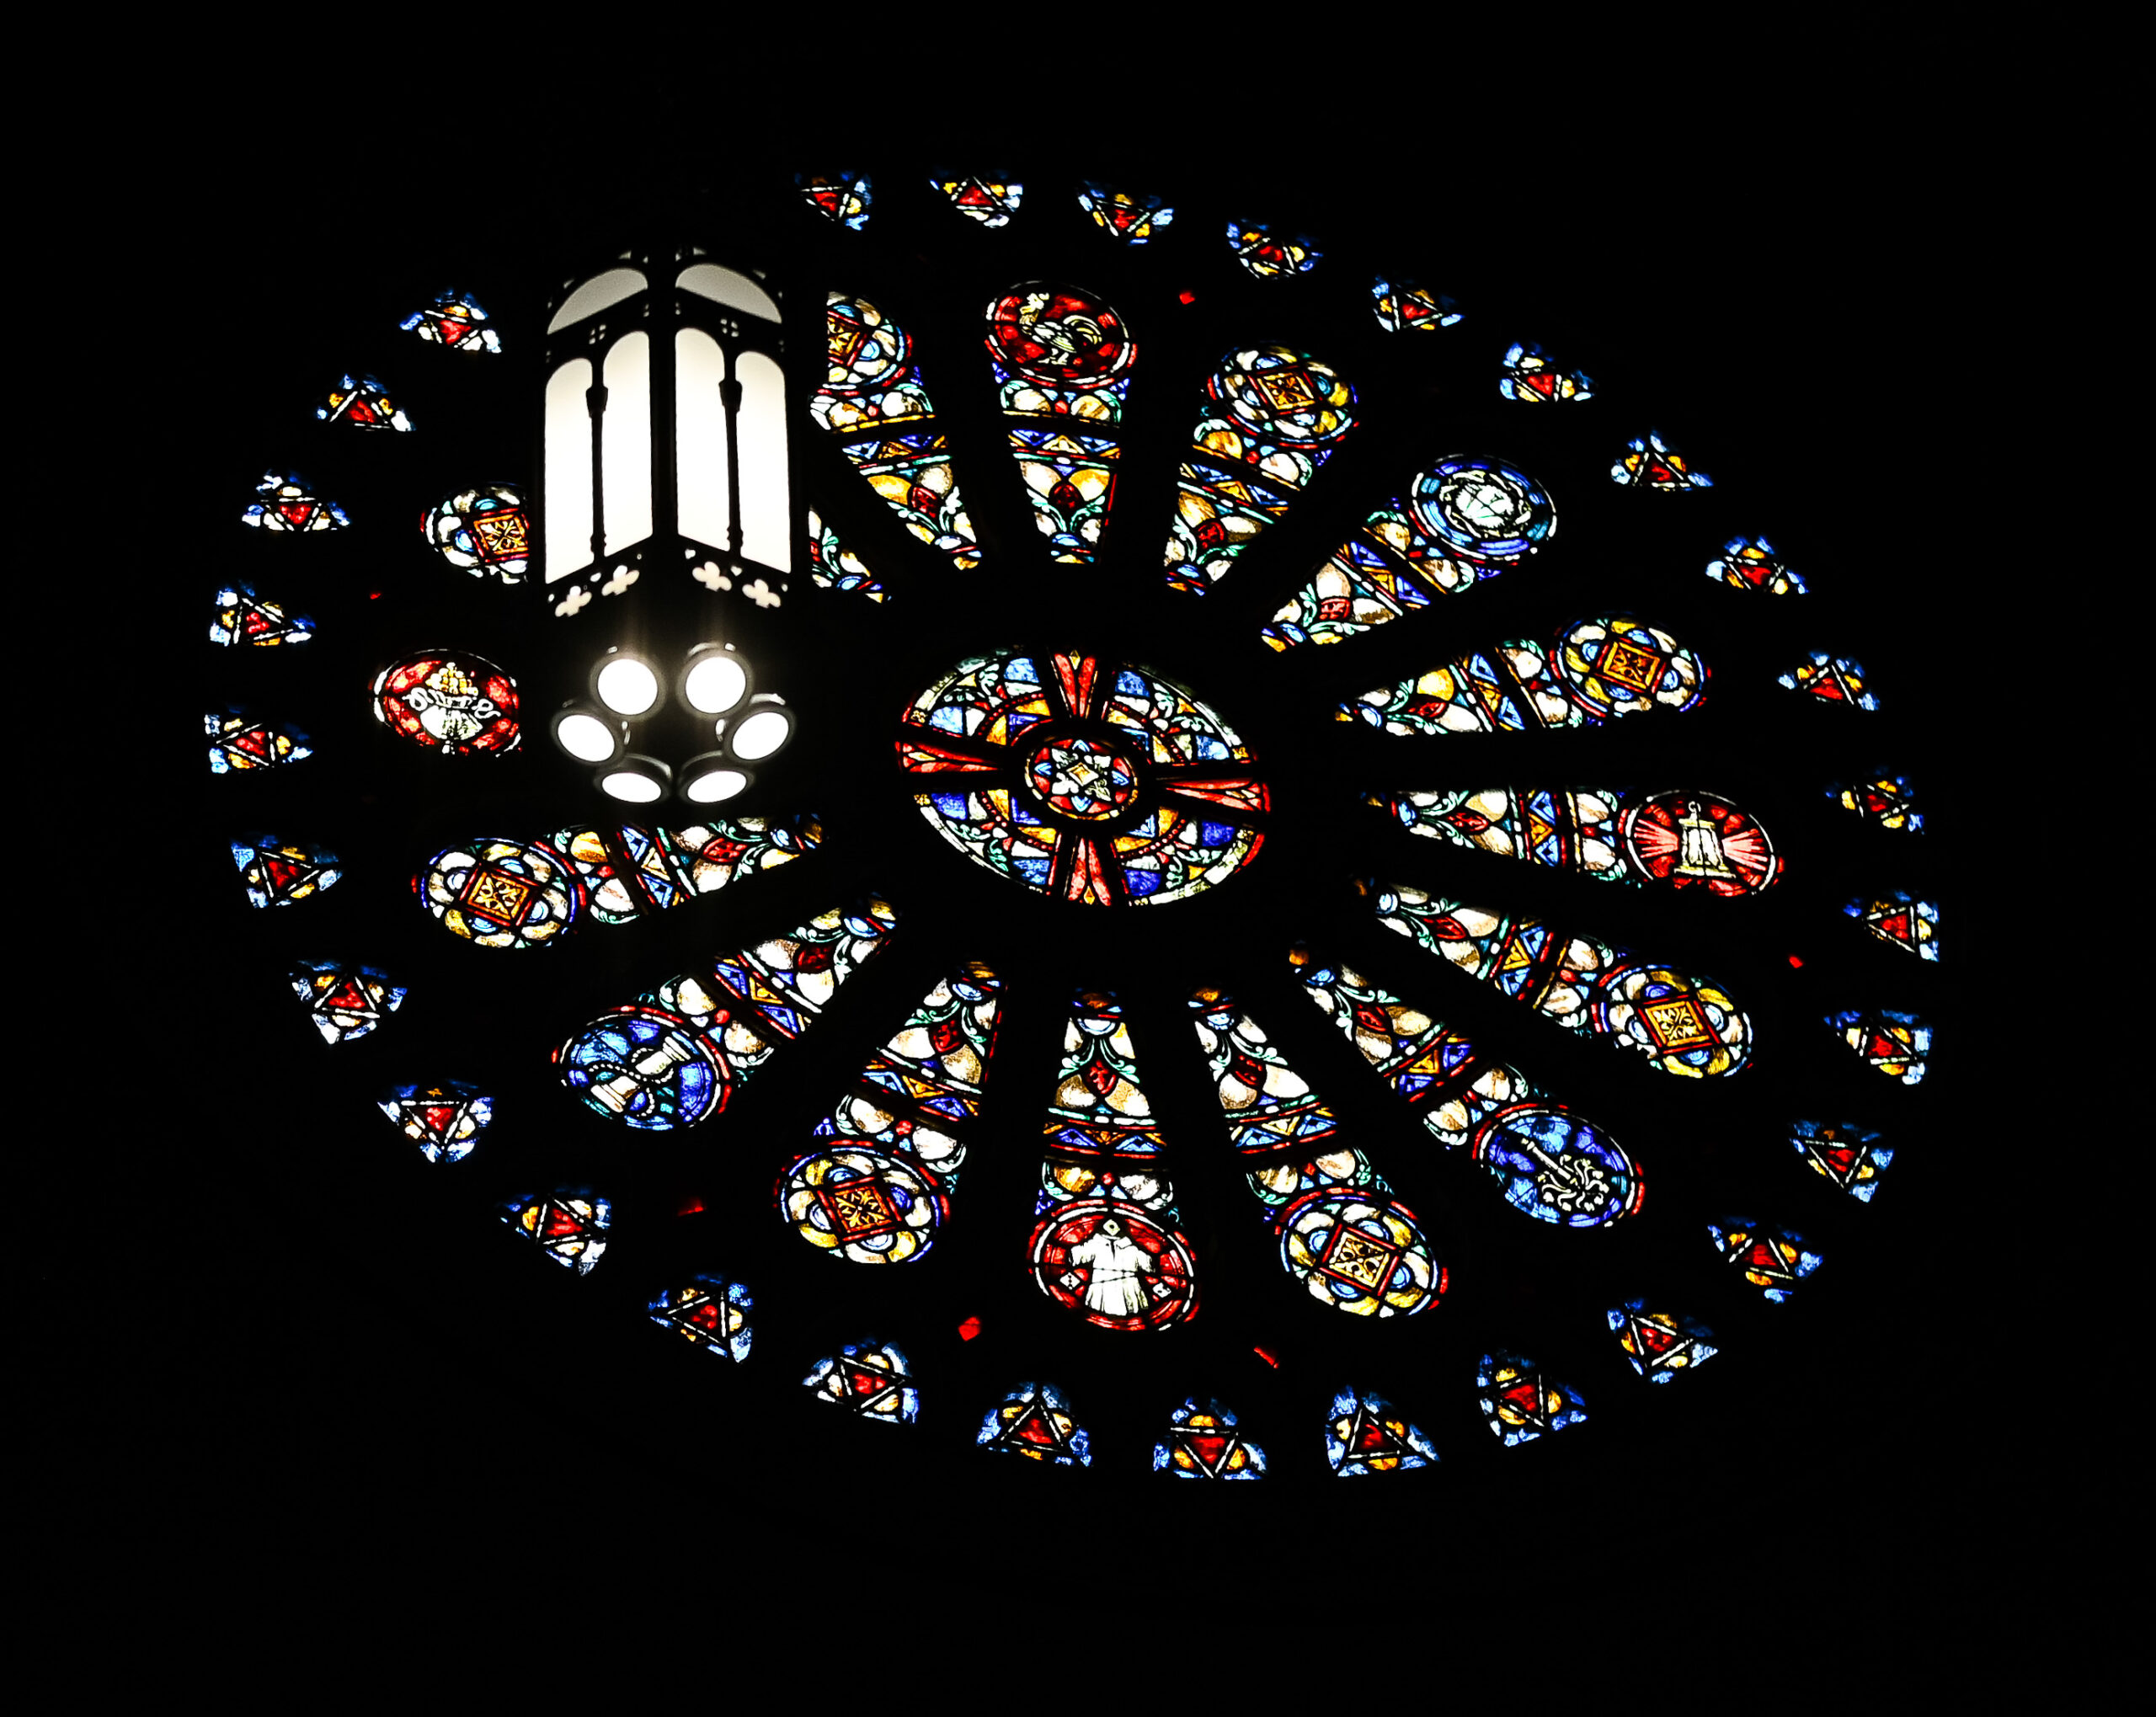 A vibrant rose window in a church, featuring intricate stained glass patterns in various colors, centered by a circular clear glass pane surrounded by smaller, colorful designs.